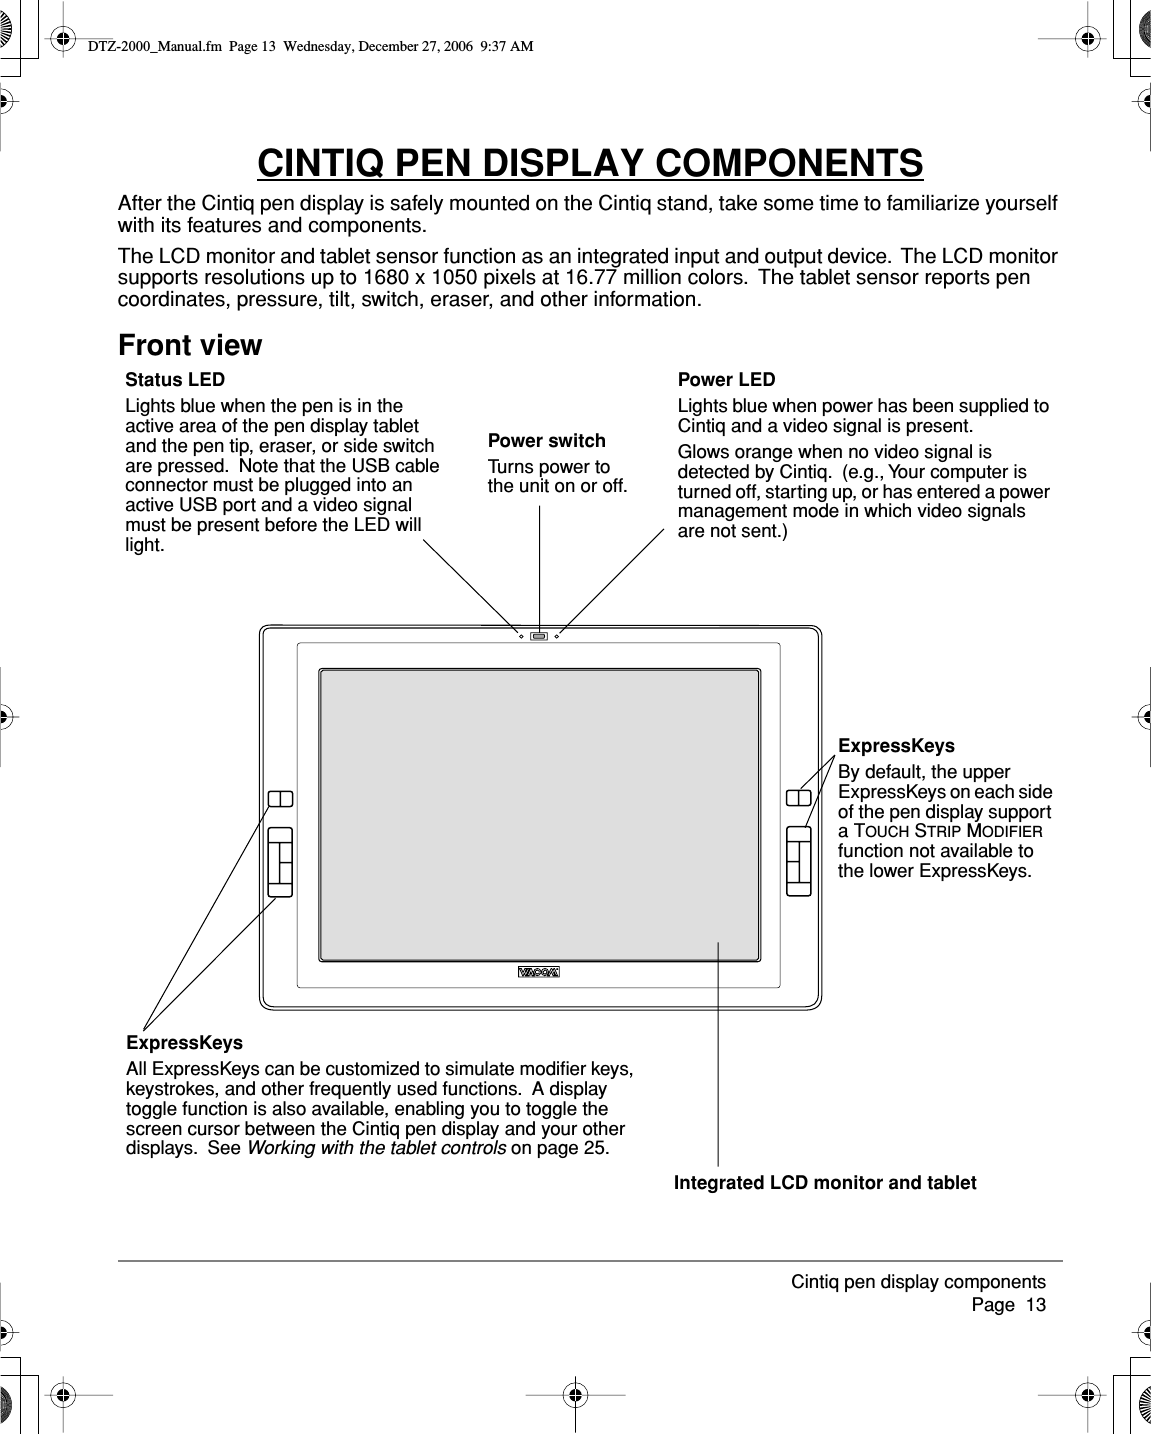 Cintiq pen display components     Page  13CINTIQ PEN DISPLAY COMPONENTSAfter the Cintiq pen display is safely mounted on the Cintiq stand, take some time to familiarize yourself with its features and components.The LCD monitor and tablet sensor function as an integrated input and output device.  The LCD monitor supports resolutions up to 1680 x 1050 pixels at 16.77 million colors.  The tablet sensor reports pen coordinates, pressure, tilt, switch, eraser, and other information.Front viewPower LEDLights blue when power has been supplied to Cintiq and a video signal is present.Glows orange when no video signal is detected by Cintiq.  (e.g., Your computer is turned off, starting up, or has entered a power management mode in which video signals are not sent.)Power switchTurns power to the unit on or off.Status LEDLights blue when the pen is in the active area of the pen display tablet and the pen tip, eraser, or side switch are pressed.  Note that the USB cable connector must be plugged into an active USB port and a video signal must be present before the LED will light.Integrated LCD monitor and tabletExpressKeysAll ExpressKeys can be customized to simulate modiﬁer keys, keystrokes, and other frequently used functions.  A display toggle function is also available, enabling you to toggle the screen cursor between the Cintiq pen display and your other displays.  See Working with the tablet controls on page 25.ExpressKeysBy default, the upper ExpressKeys on each side of the pen display support a TOUCH STRIP MODIFIER function not available to the lower ExpressKeys.DTZ-2000_Manual.fm  Page 13  Wednesday, December 27, 2006  9:37 AM